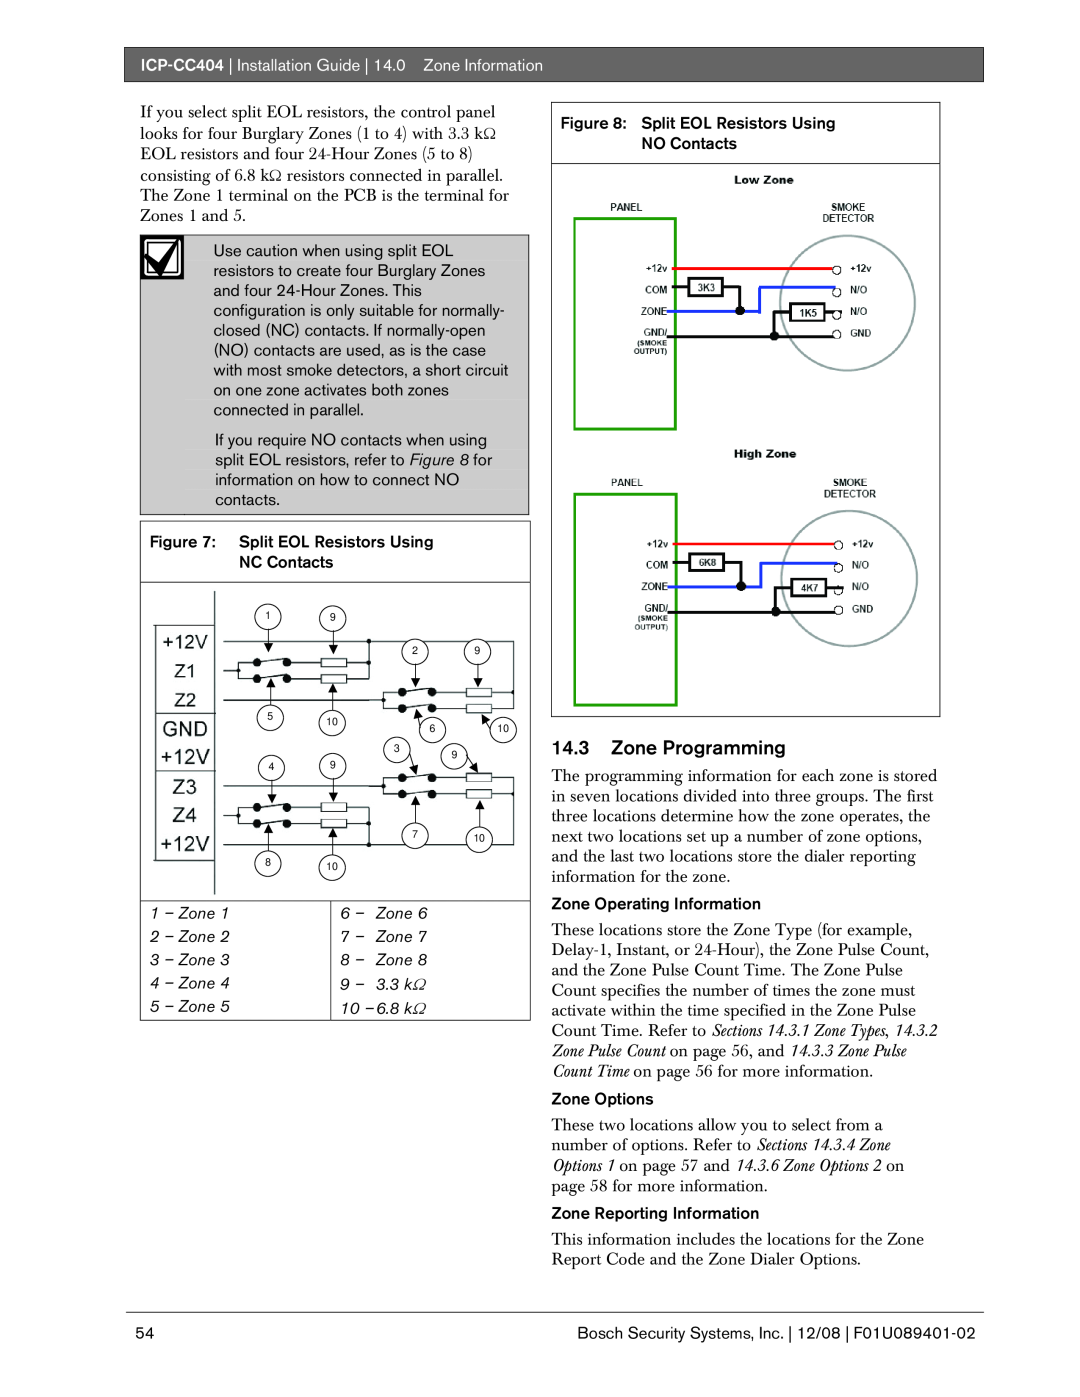 Bosch Appliances ICP-CC404 manual 14.3Zone Programming, Split EOL Resistors Using NC Contacts, Zone Operating Information 